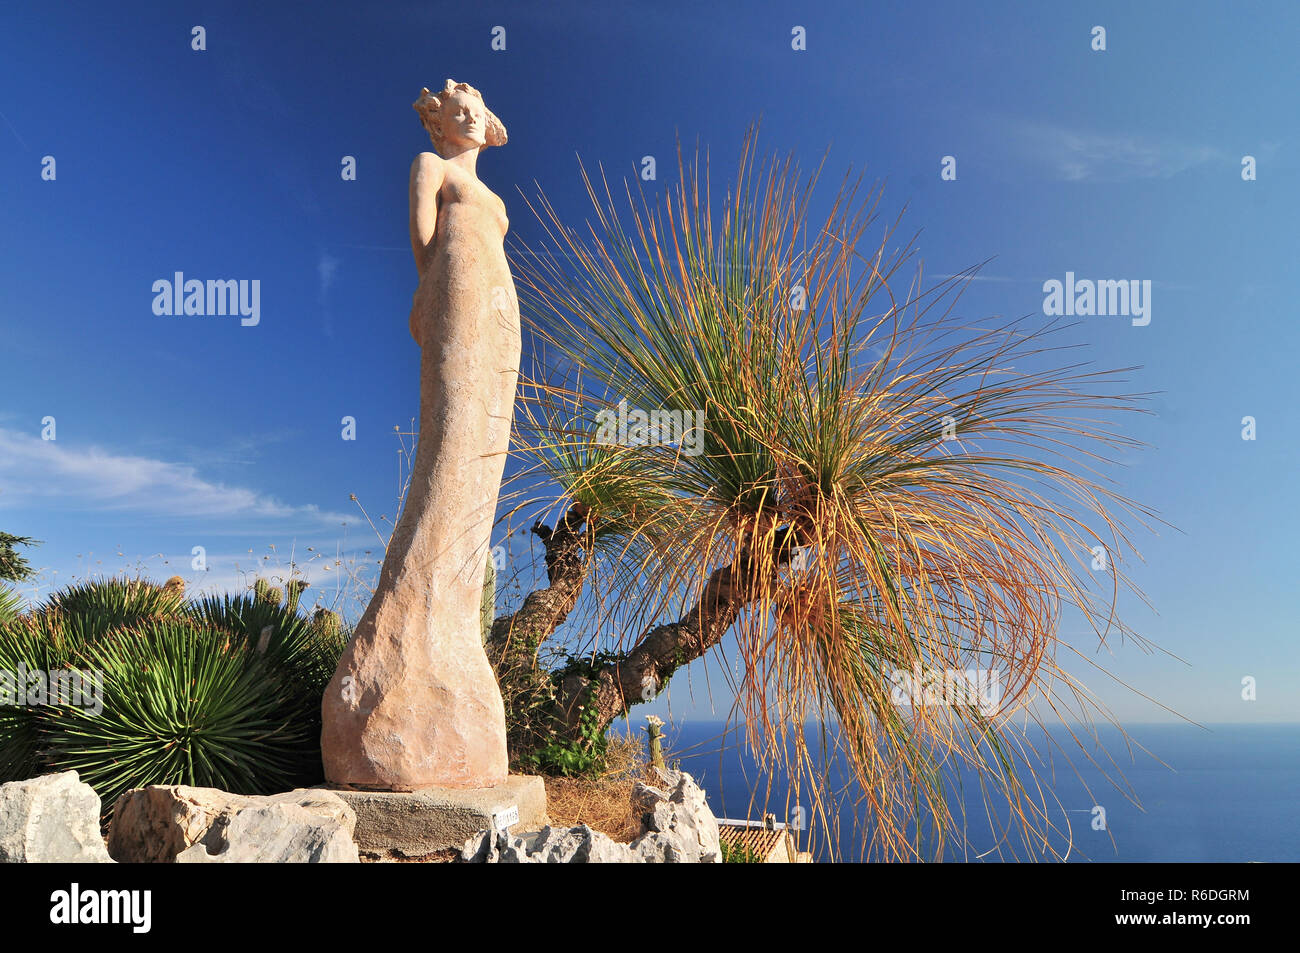 Exotic Cacti Garden At The Very Top Of The Mediaeval Hilltop Village Of Eze, France Stock Photo